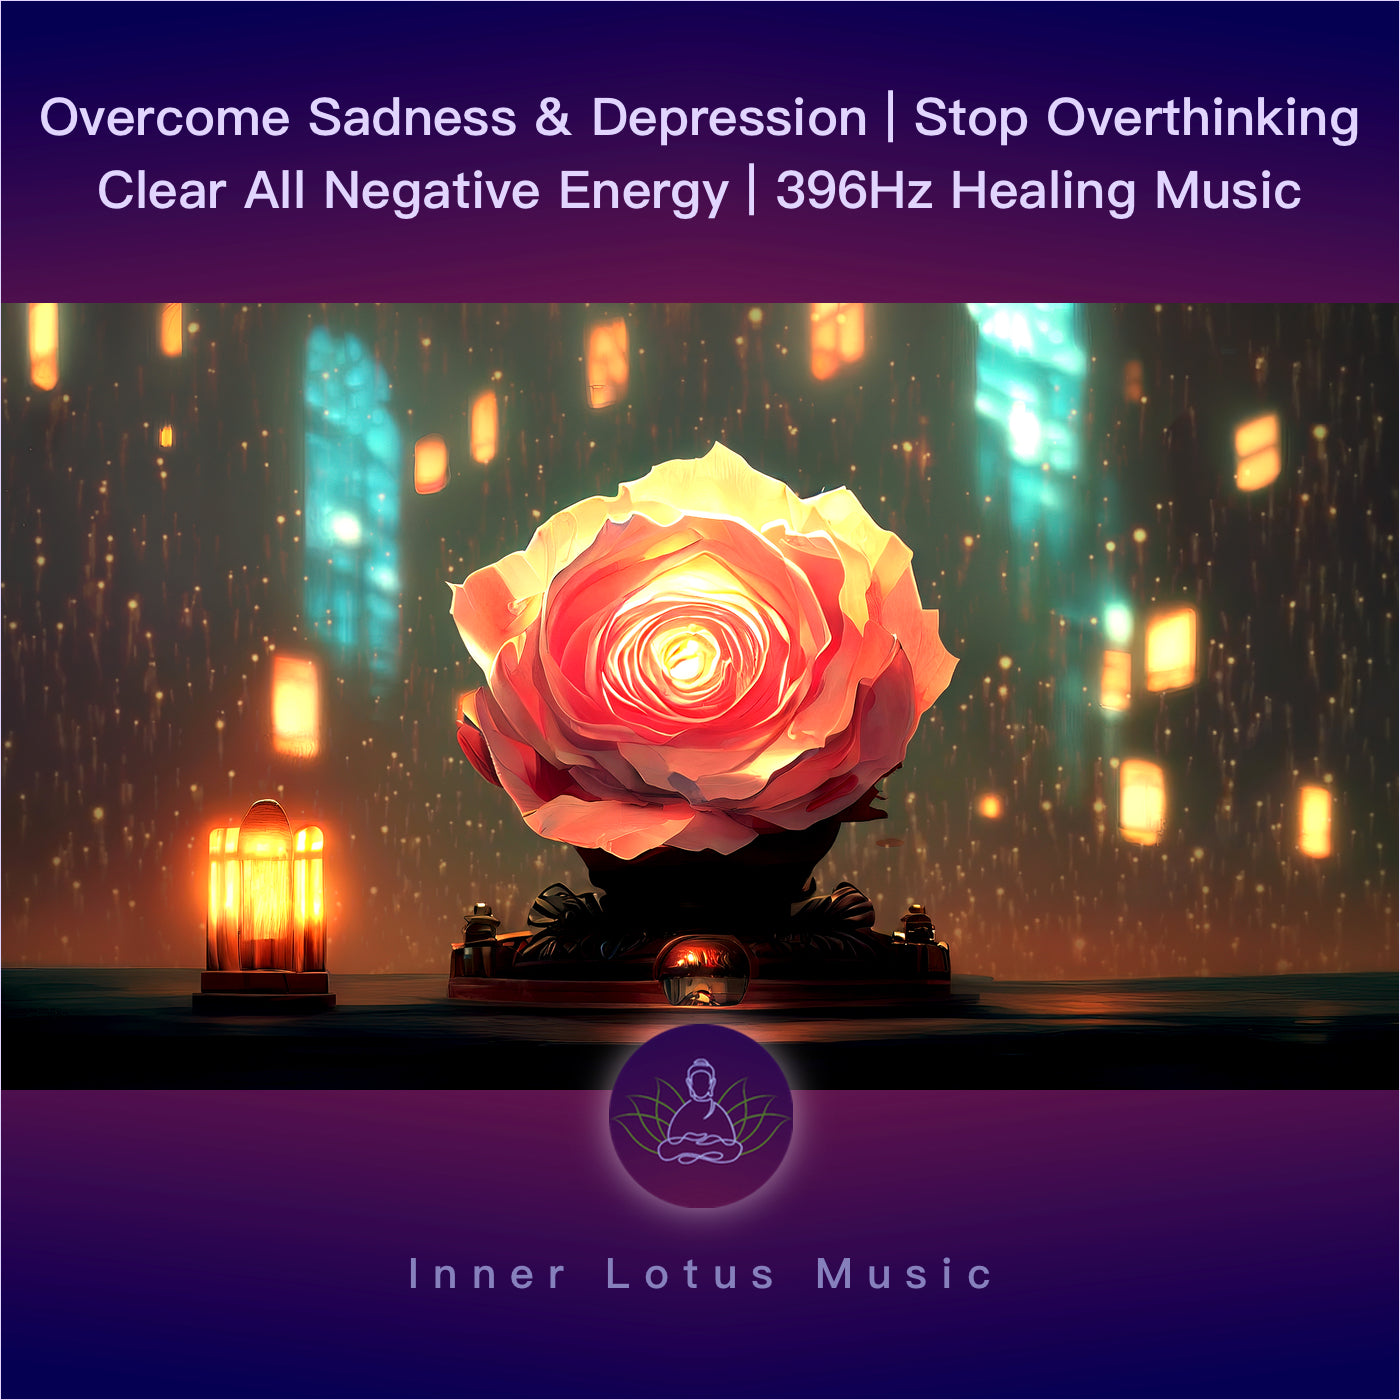 Overcome Sadness & Depression | Stop Overthinking & Clear All Negative Energy | 396Hz Healing Music